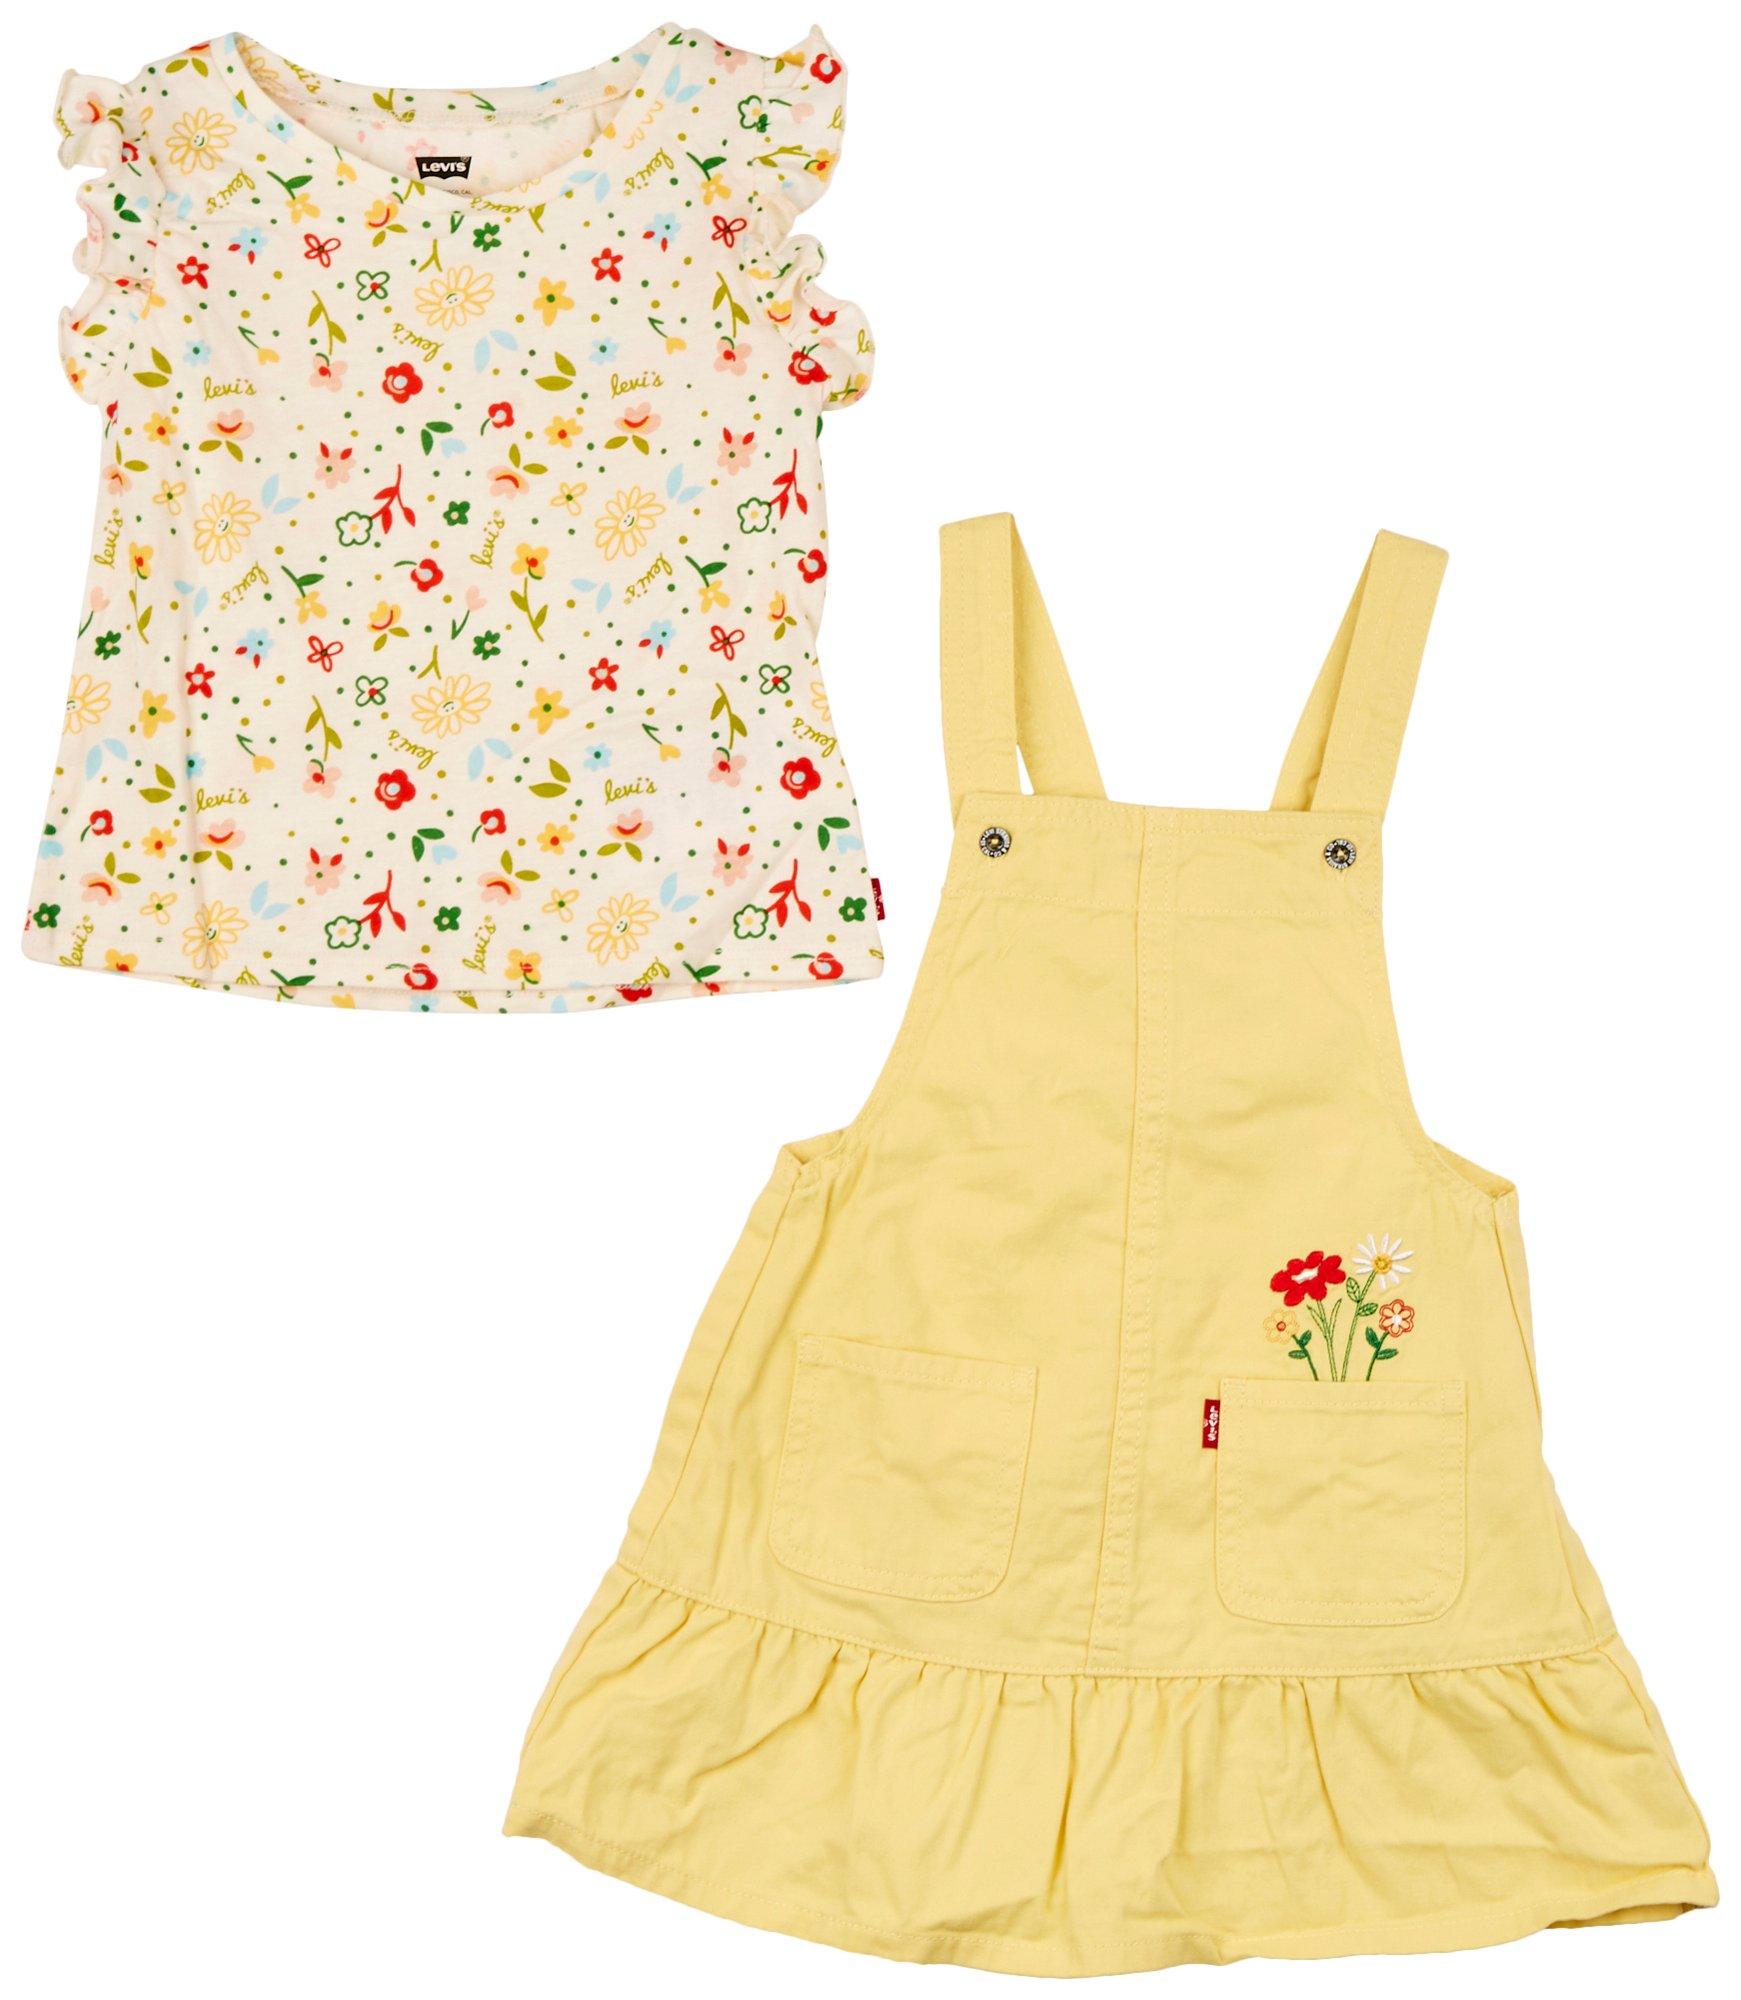 Levi's Toddler Girls 2 pc. Top and Dress